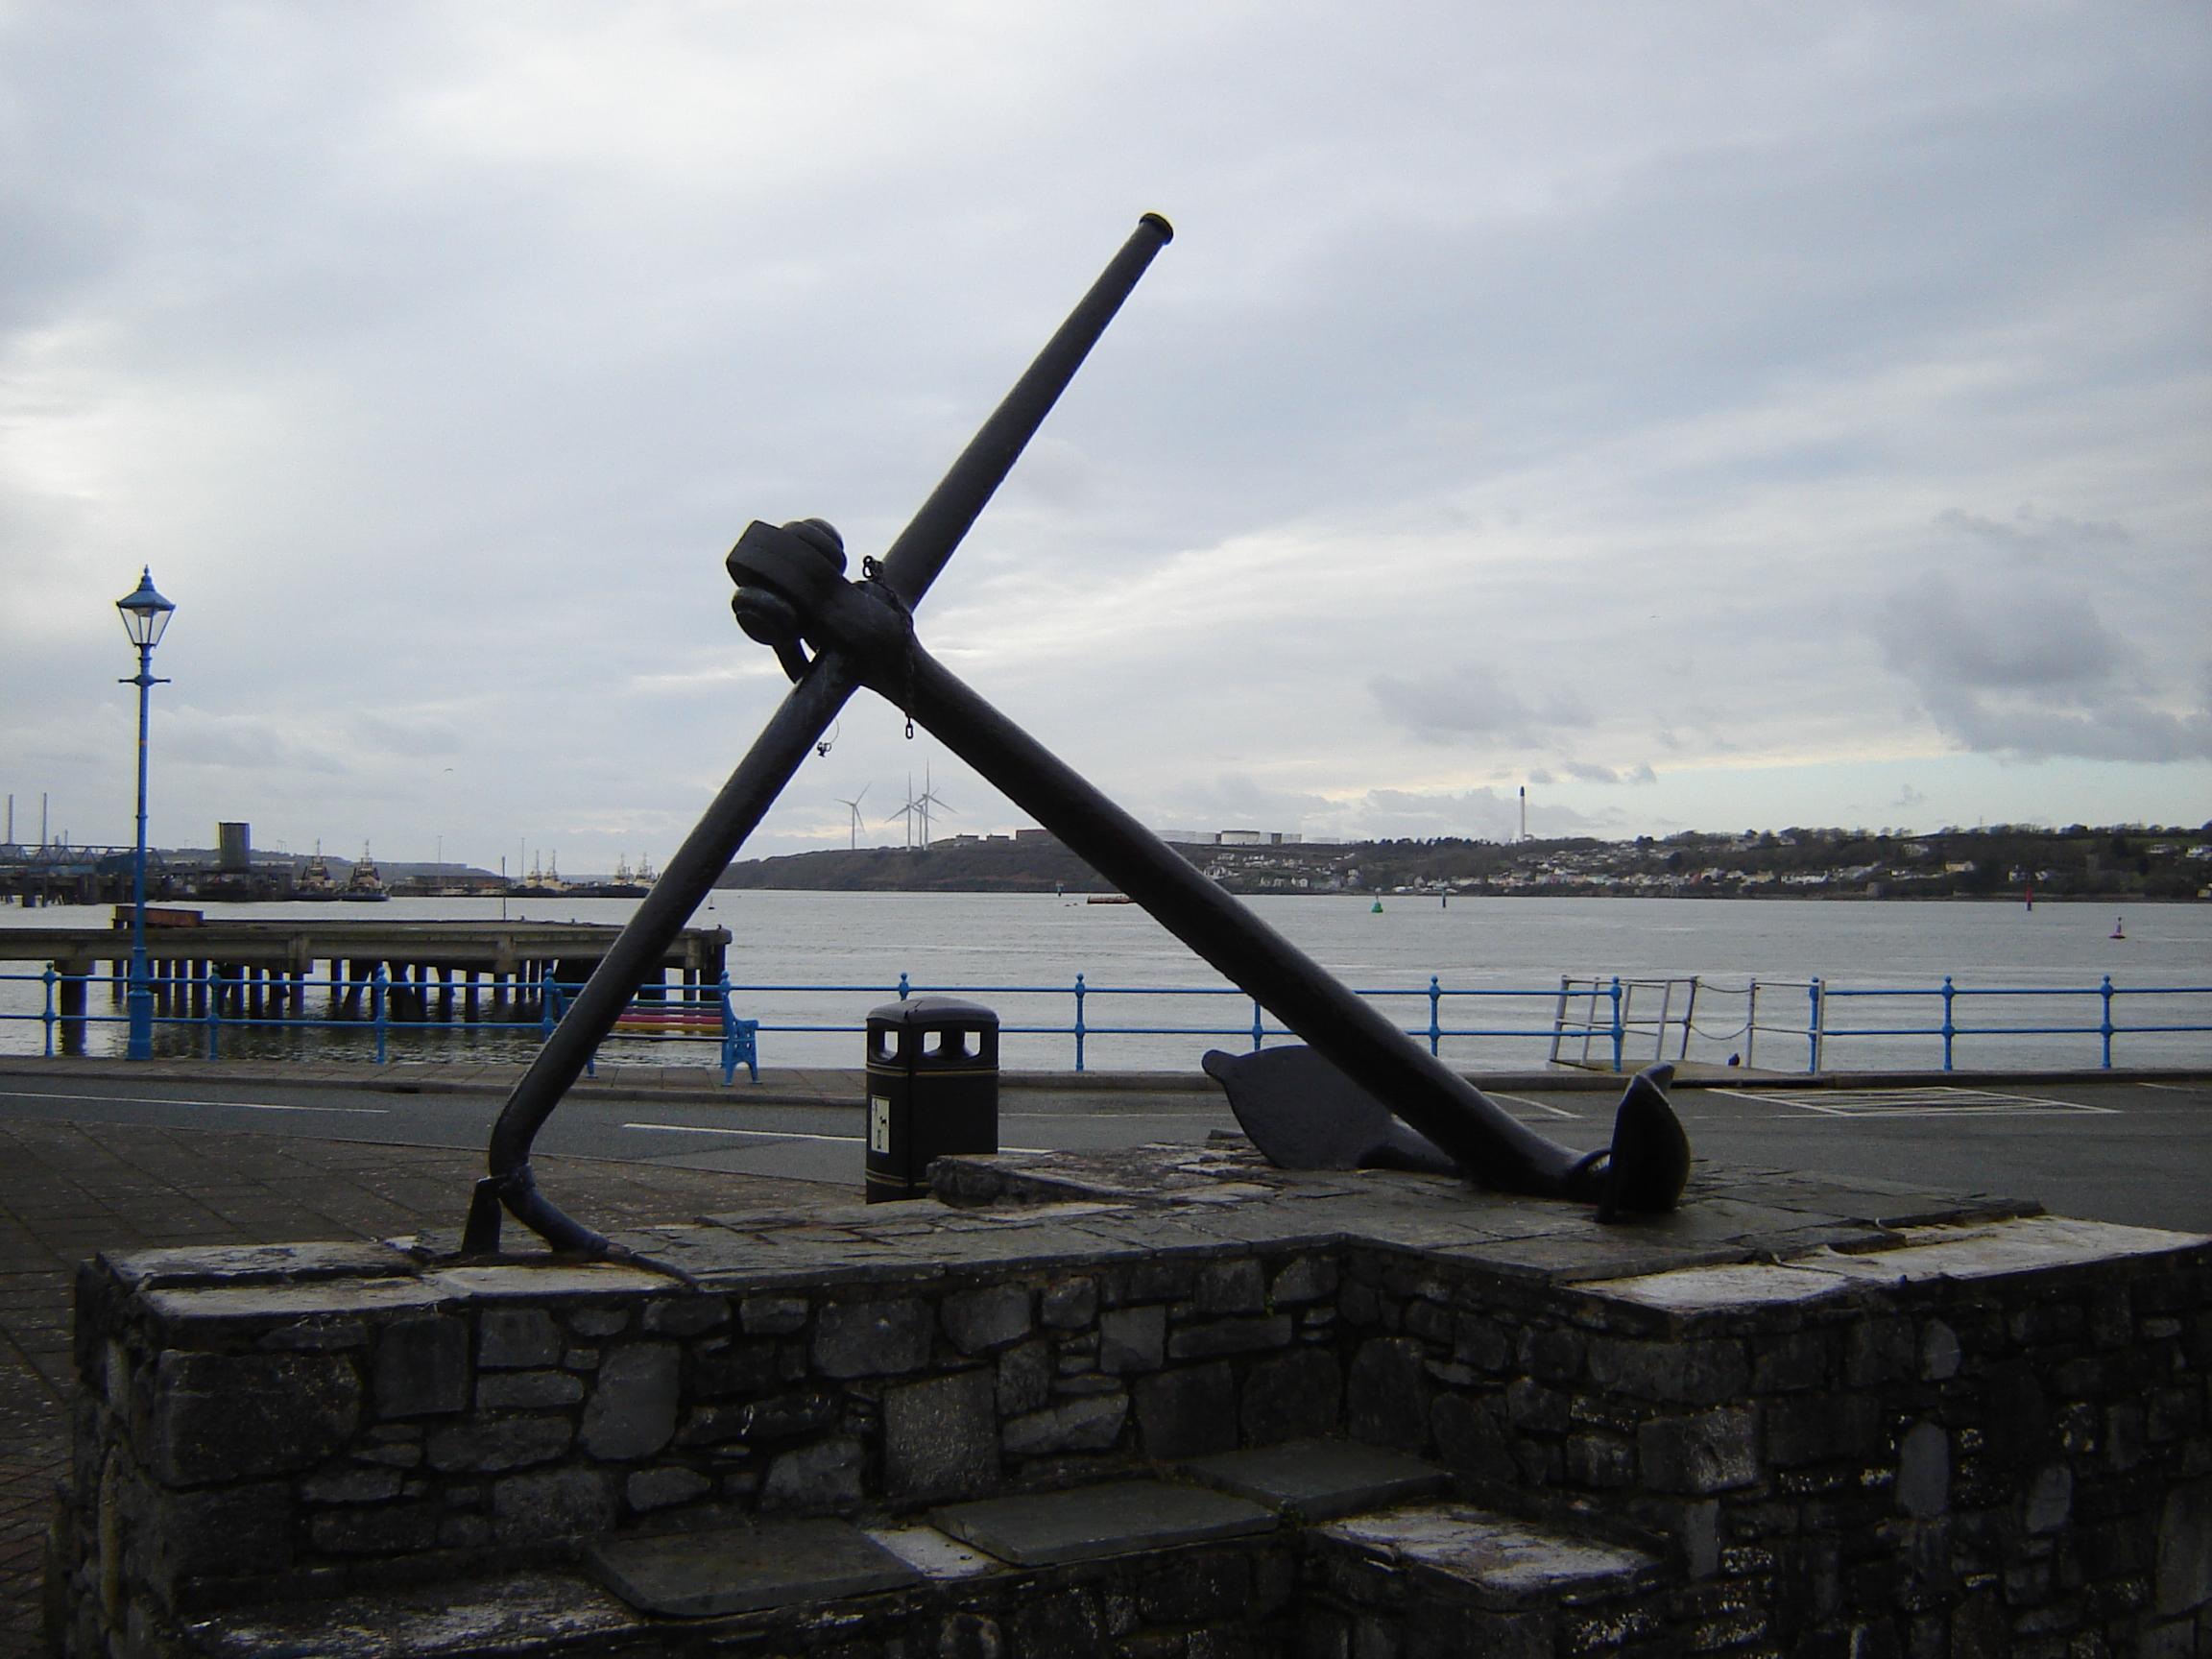 An anchor outside the Pembroke Haven Yacht Club at the eastern end of Milford Haven, with a 21st century wind farm in the background.